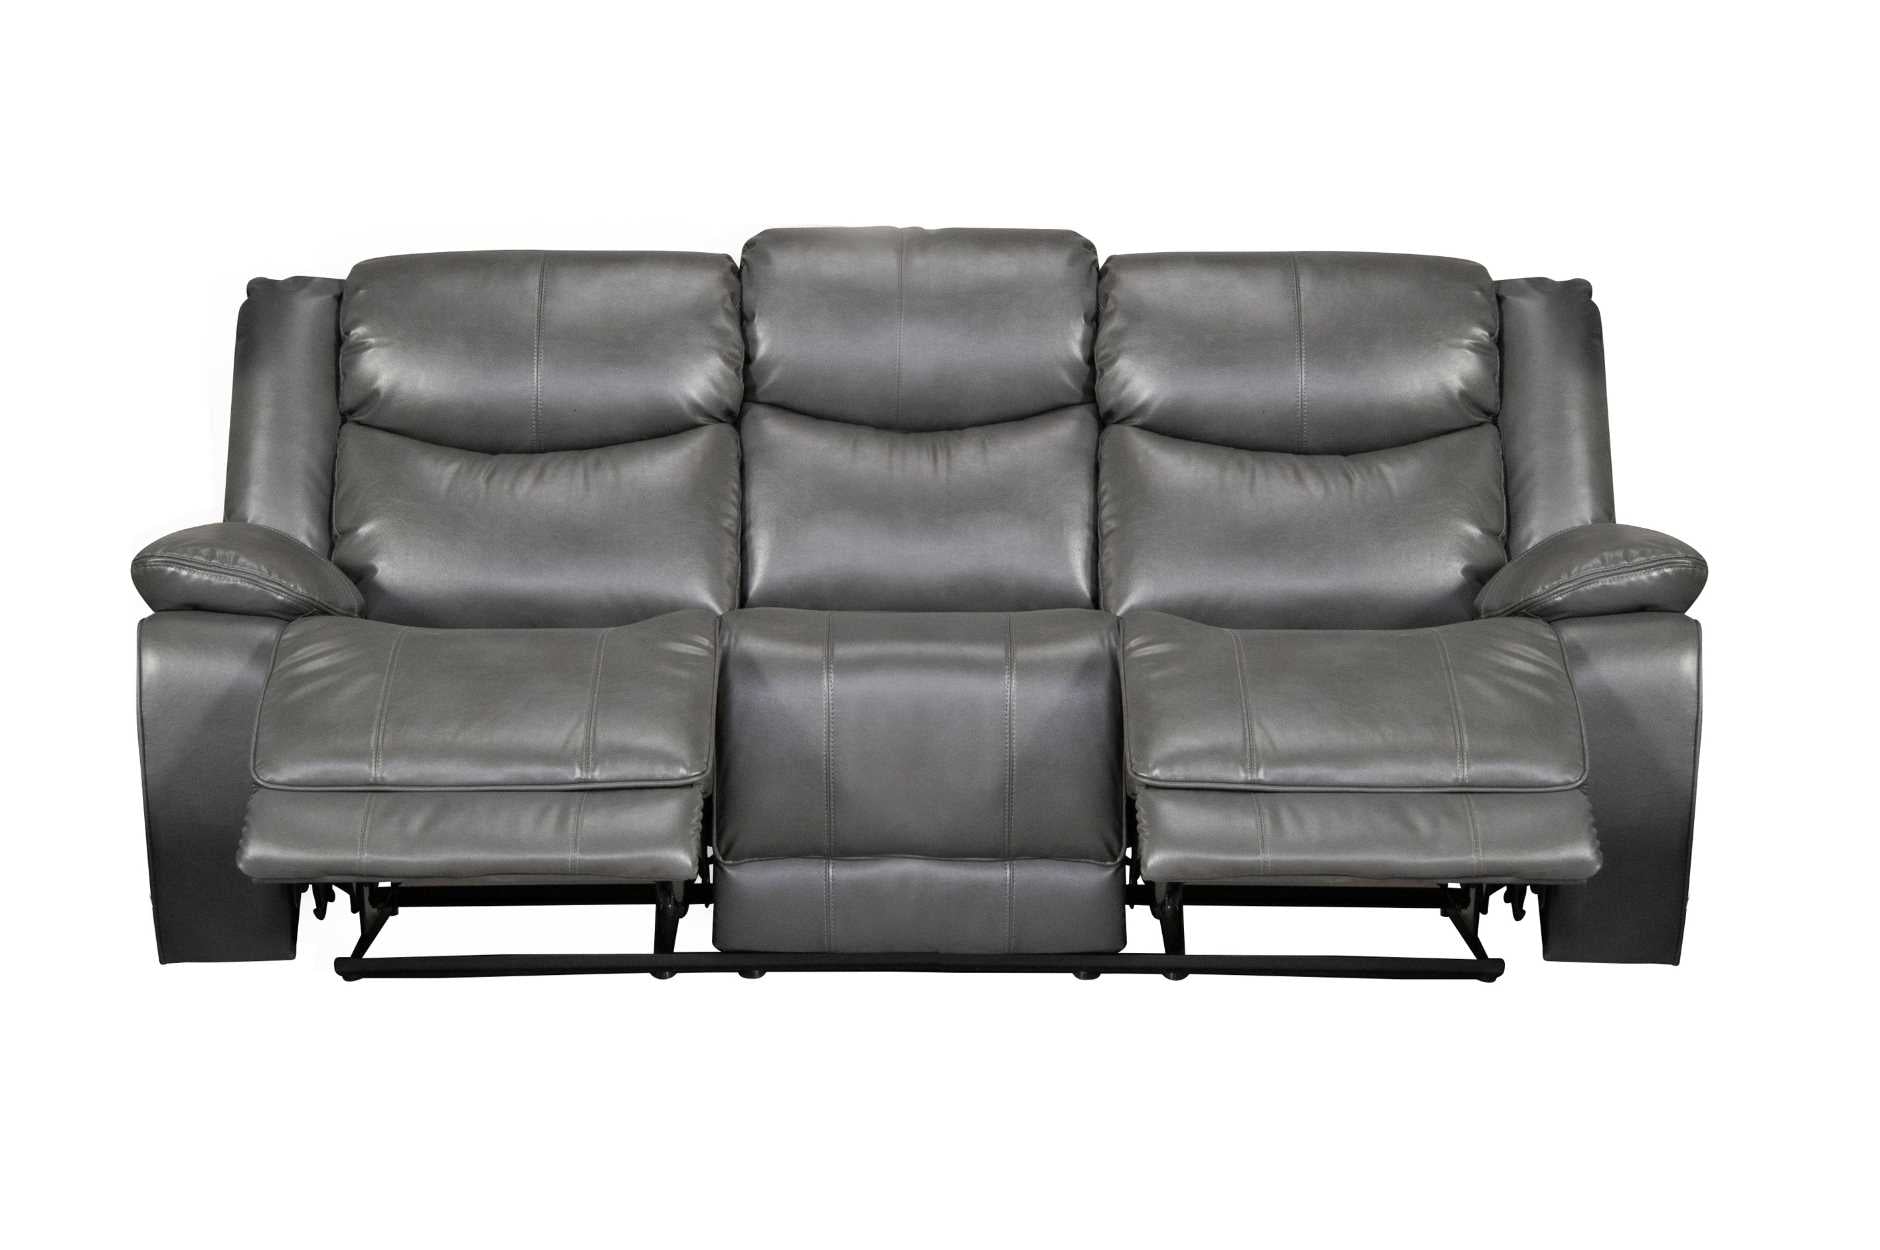 Caledon Reclining Collection Grey Leather Airehyde-Match Upholstery 99922